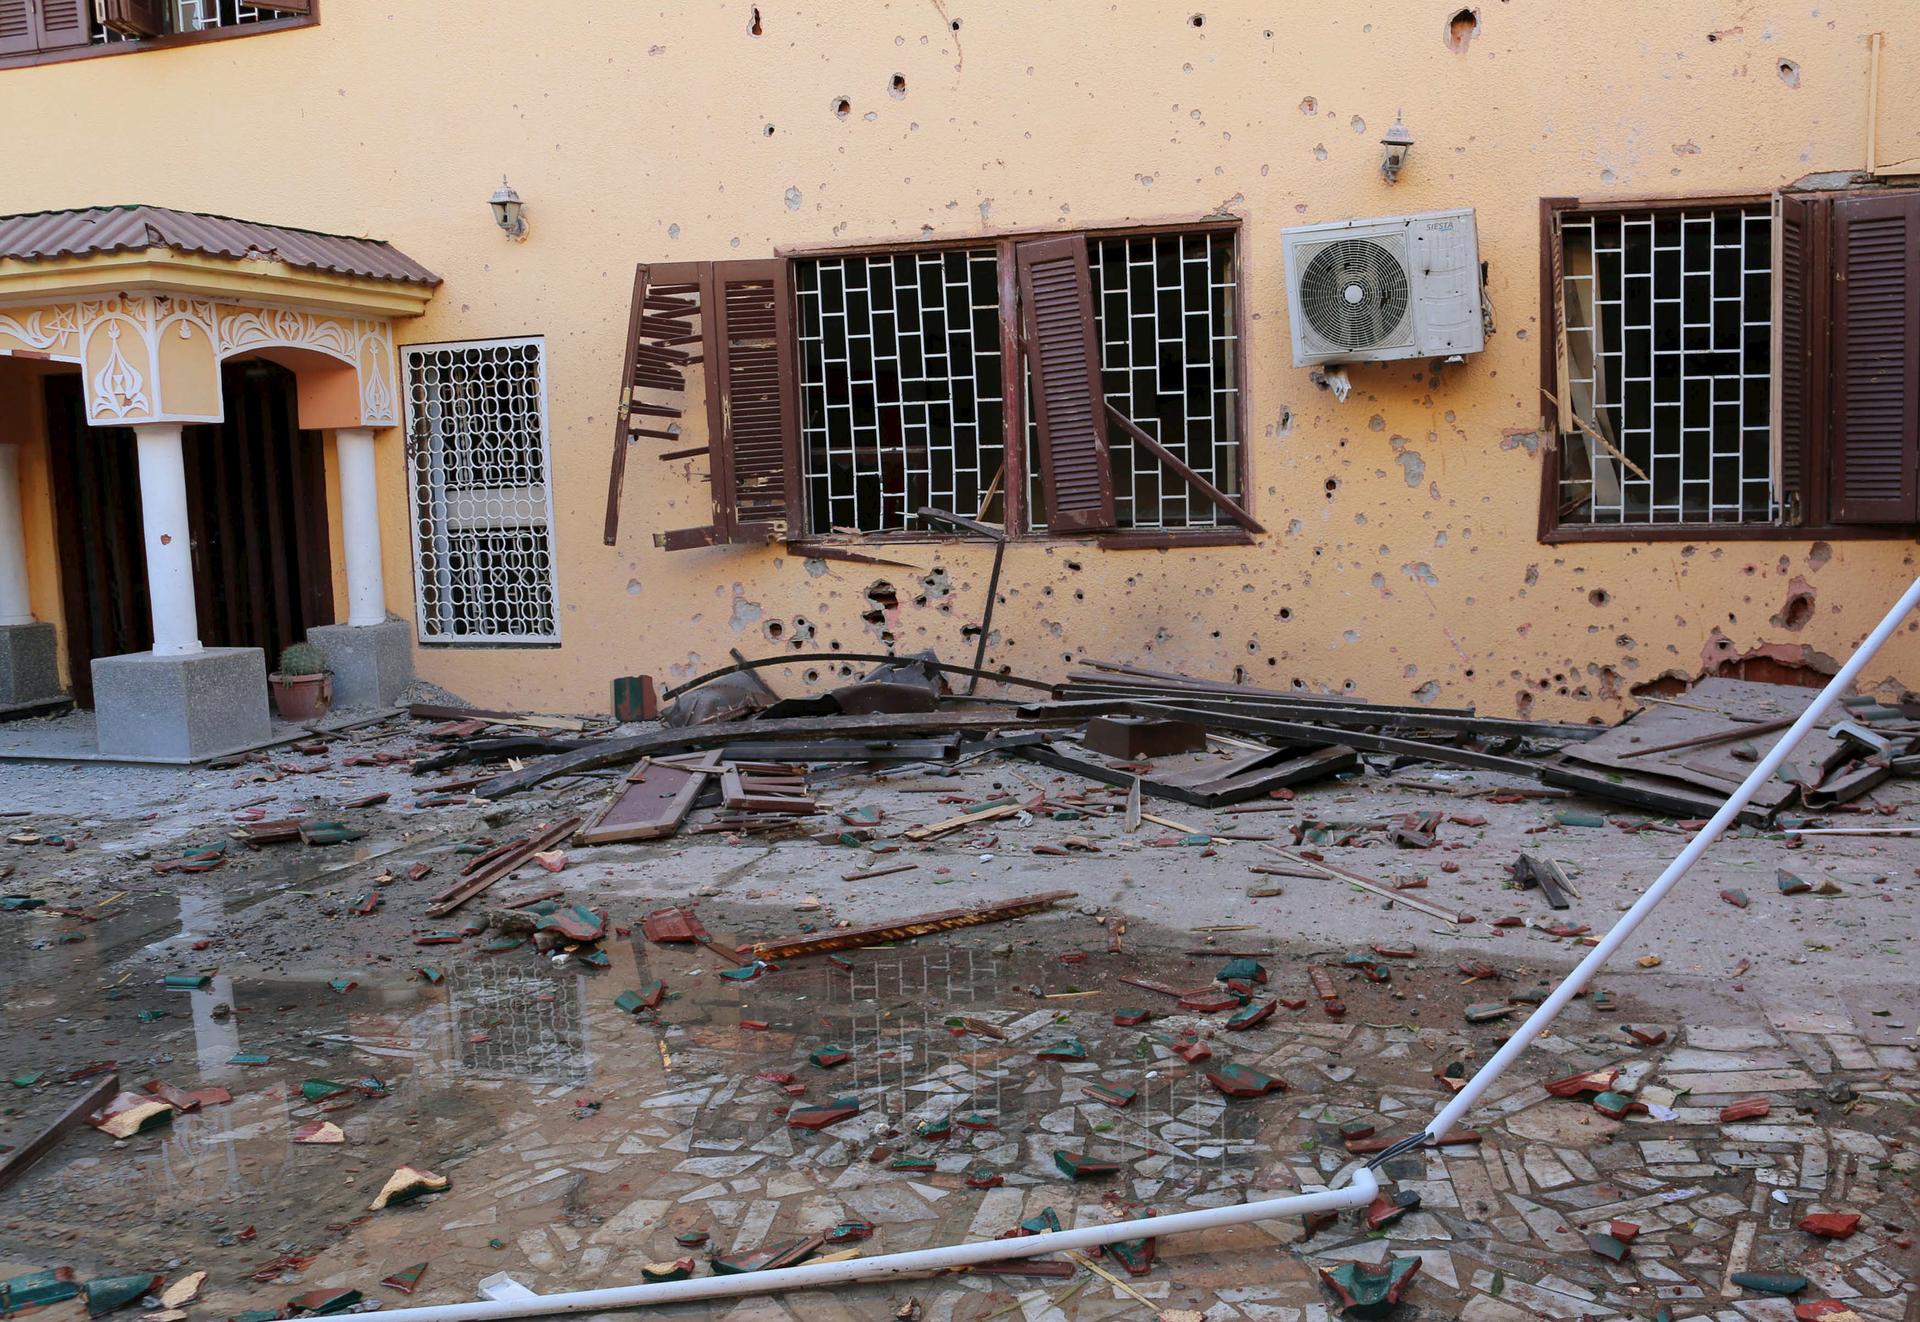 A view of damage after a bomb exploded at the gate of the Moroccan embassy in Tripoli on April 13, 2015.